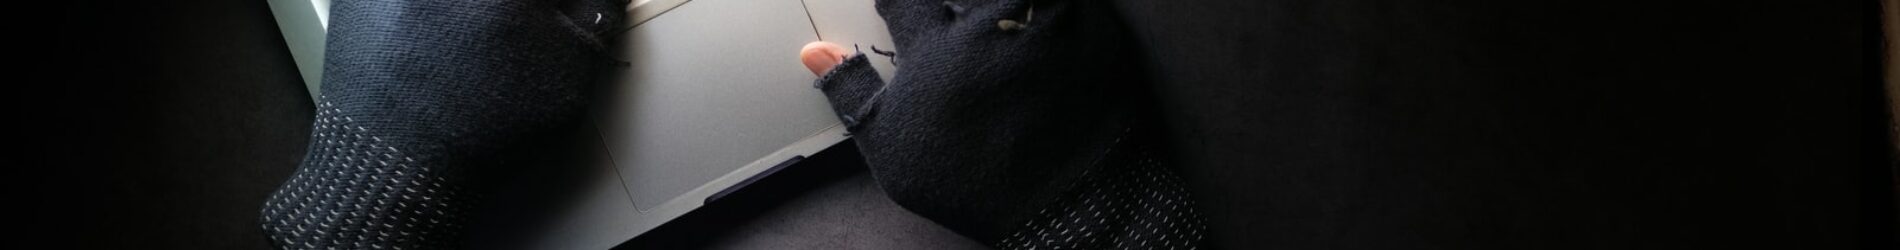 person in black long sleeve shirt using macbook pro